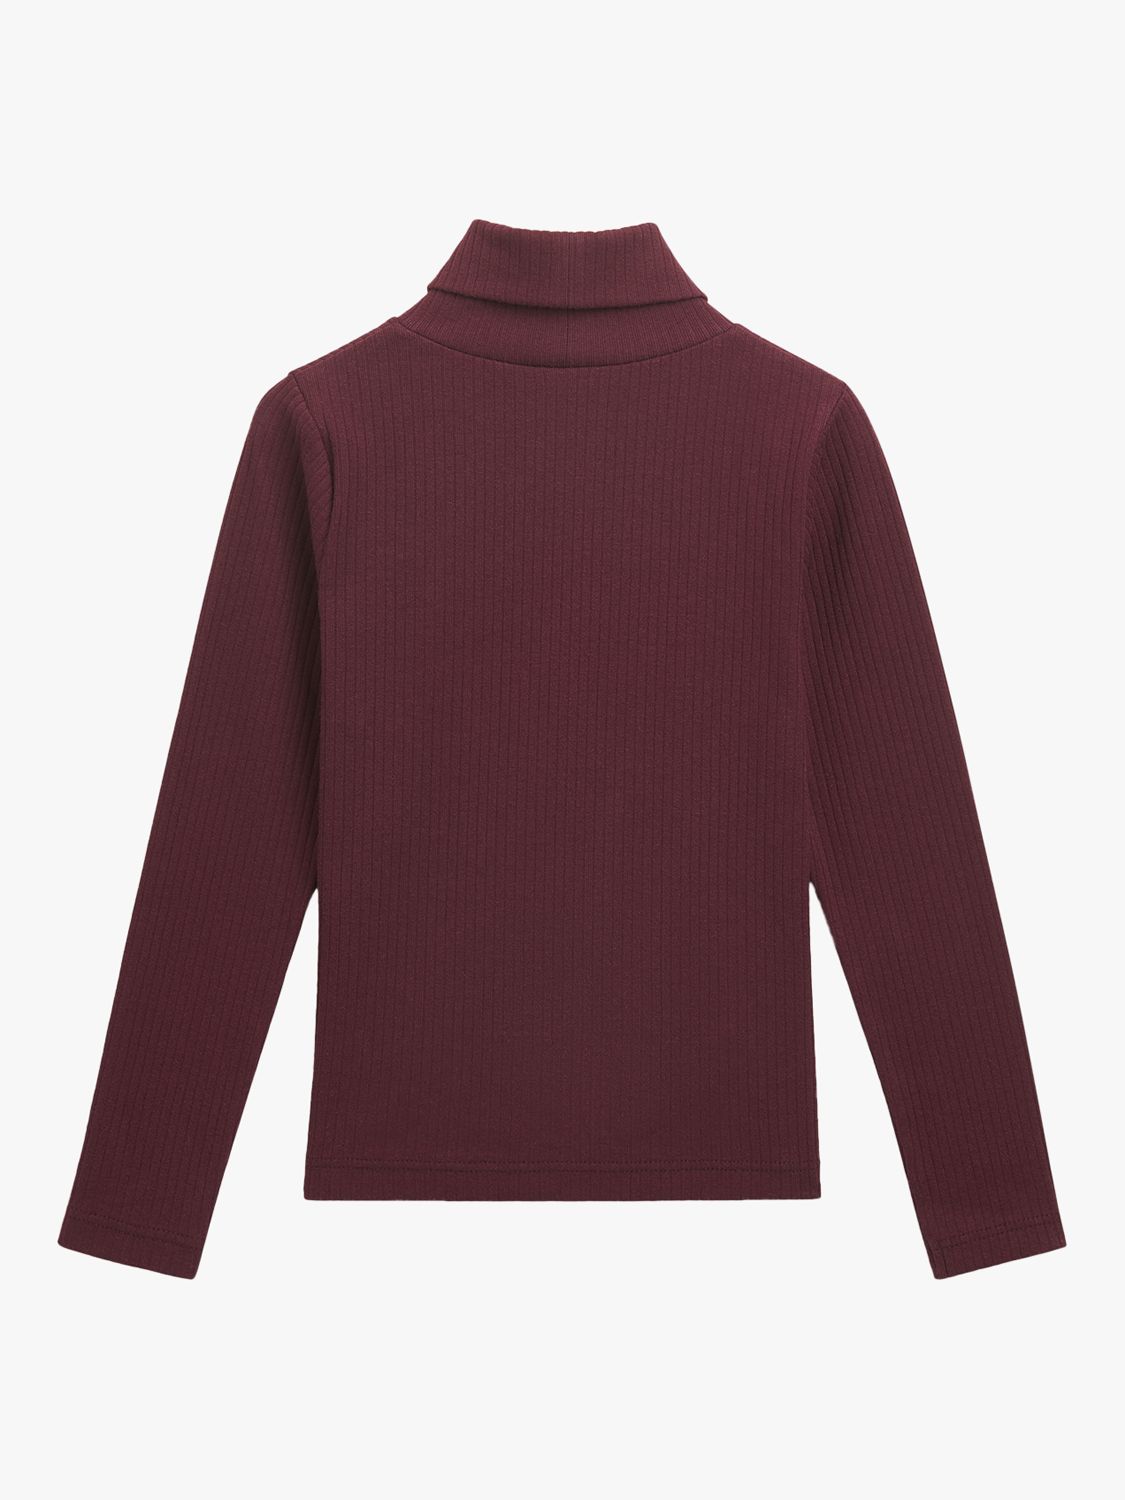 Buy Whistles Kids' Ribbed High Neck Top, Aubergine Online at johnlewis.com